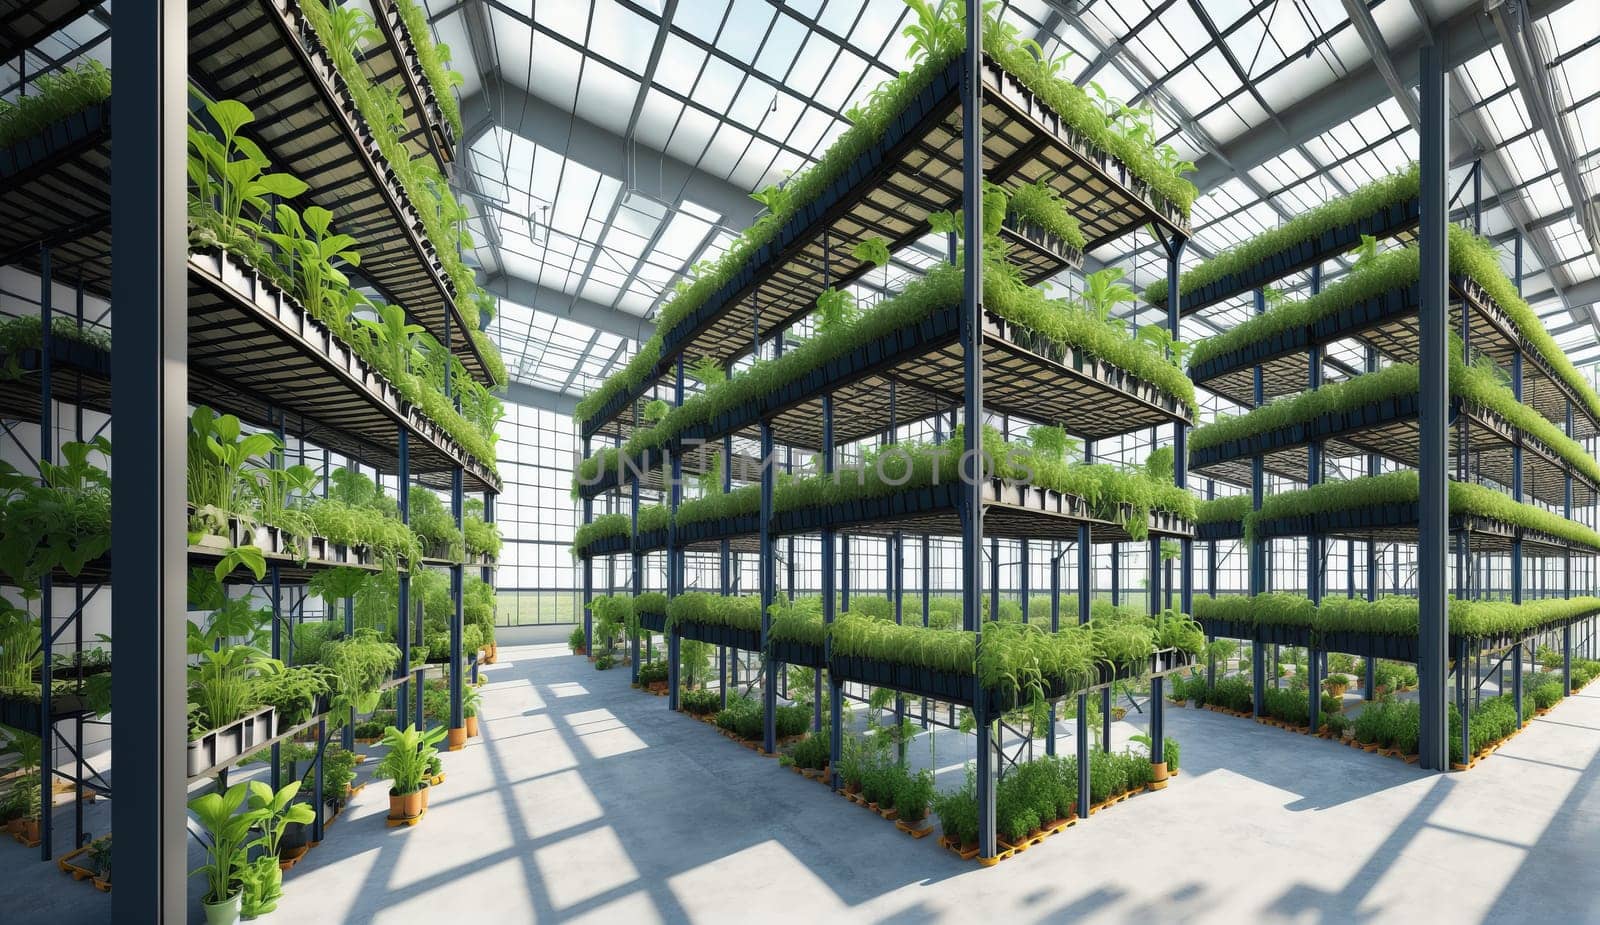 an artist s impression of a greenhouse filled with lots of plants by DCStudio